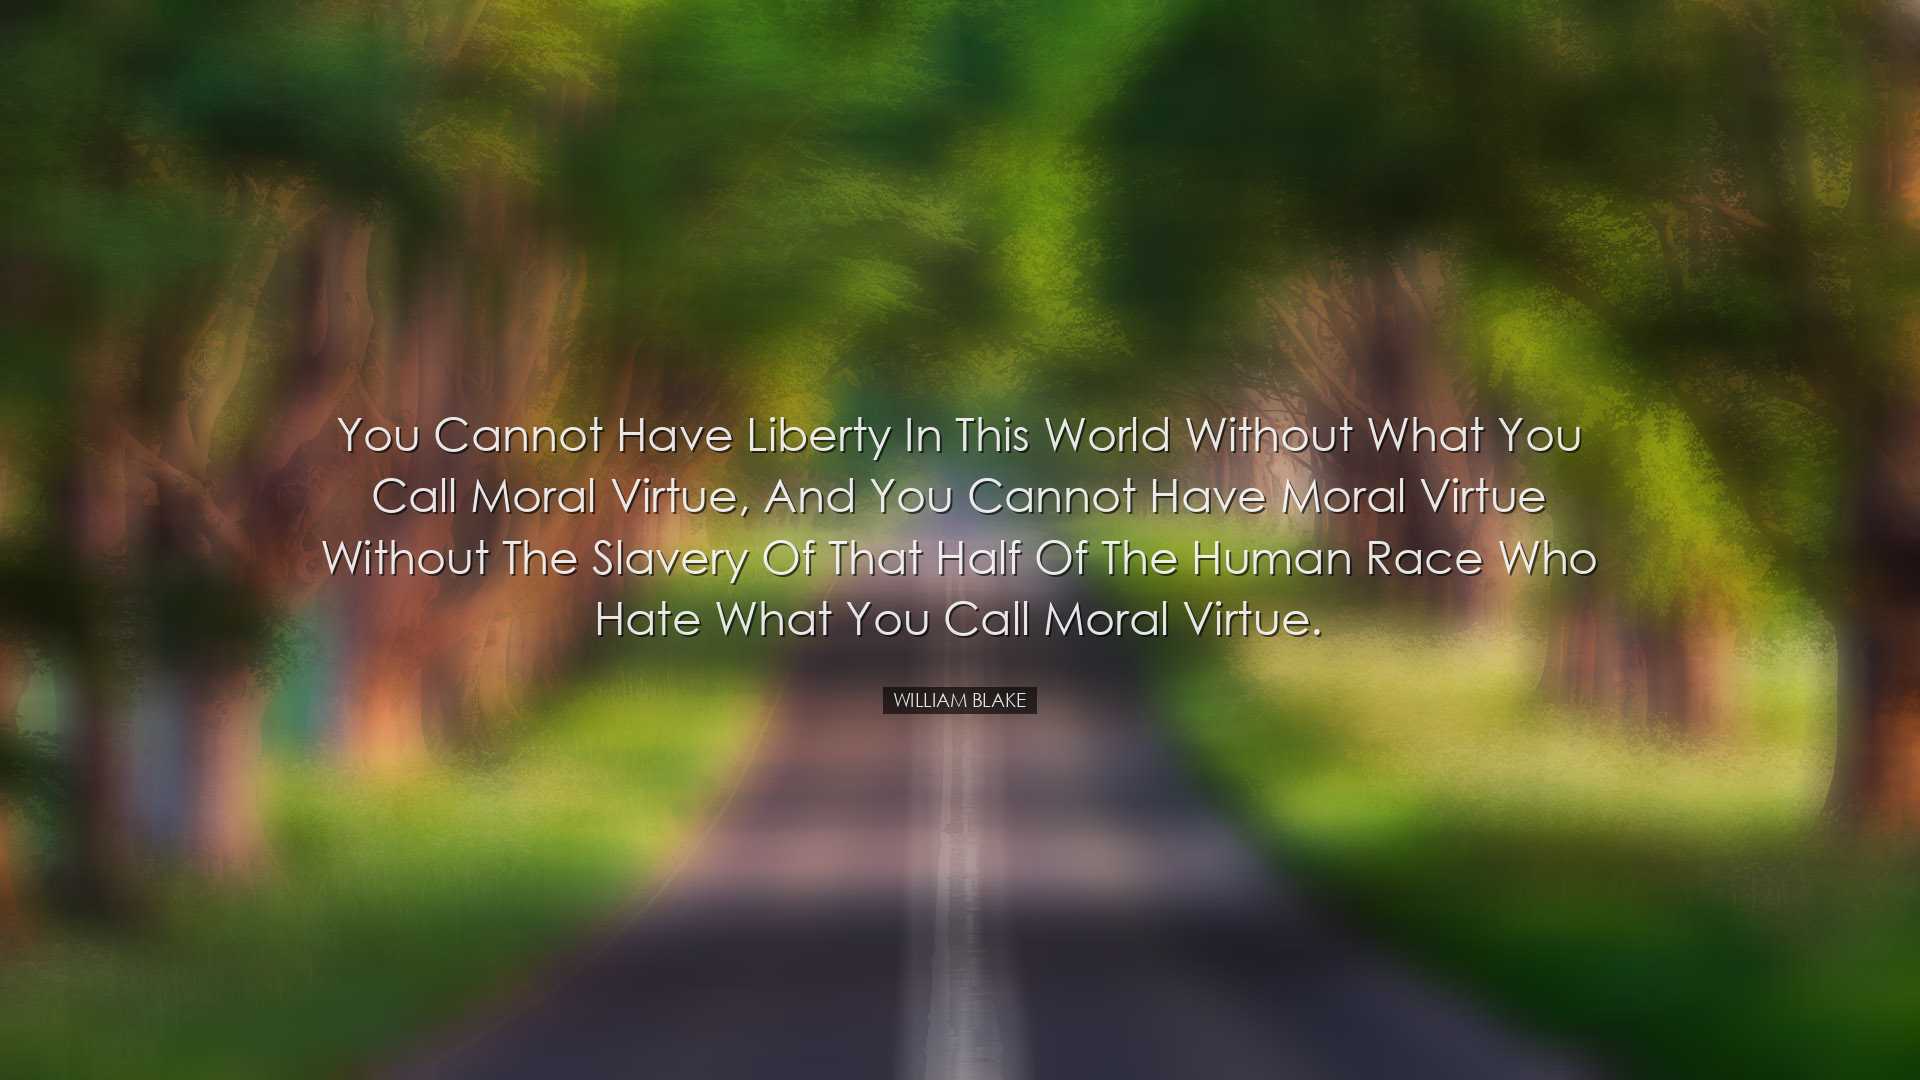 You cannot have Liberty in this world without what you call Moral